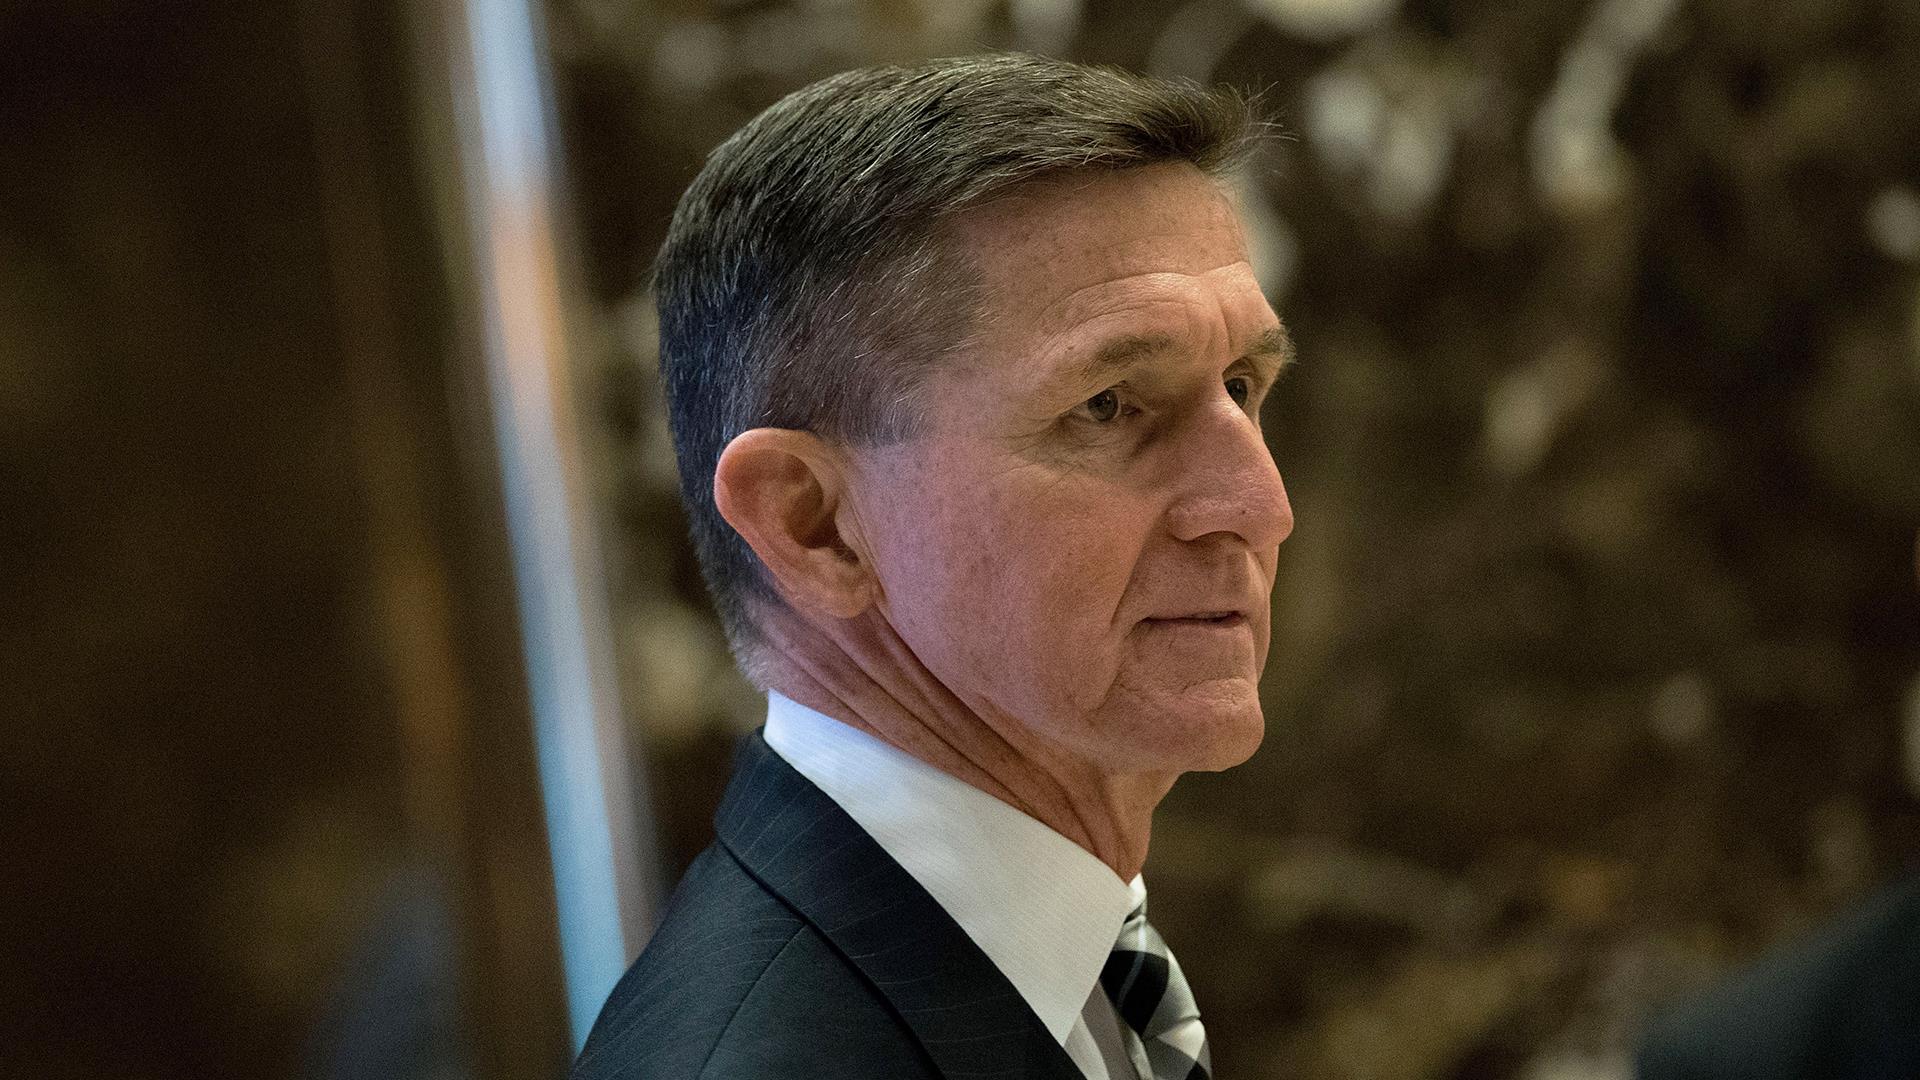 Michael Flynn was interviewed by FBI about call with Russian ambassador